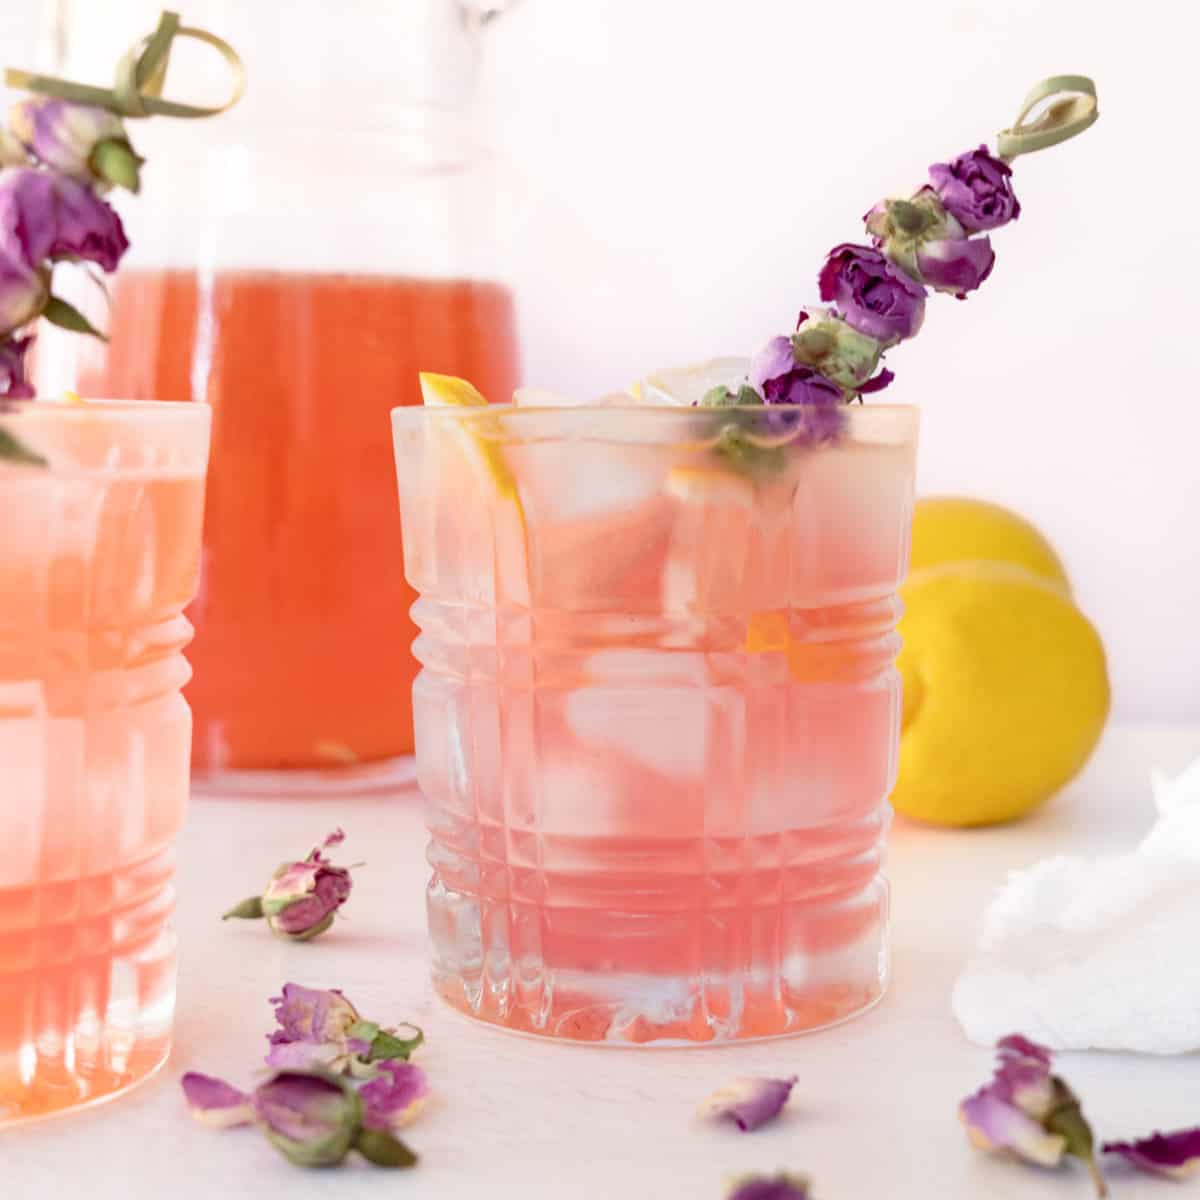 a glass of pink rose lemonade garnished with a stick of dried roses